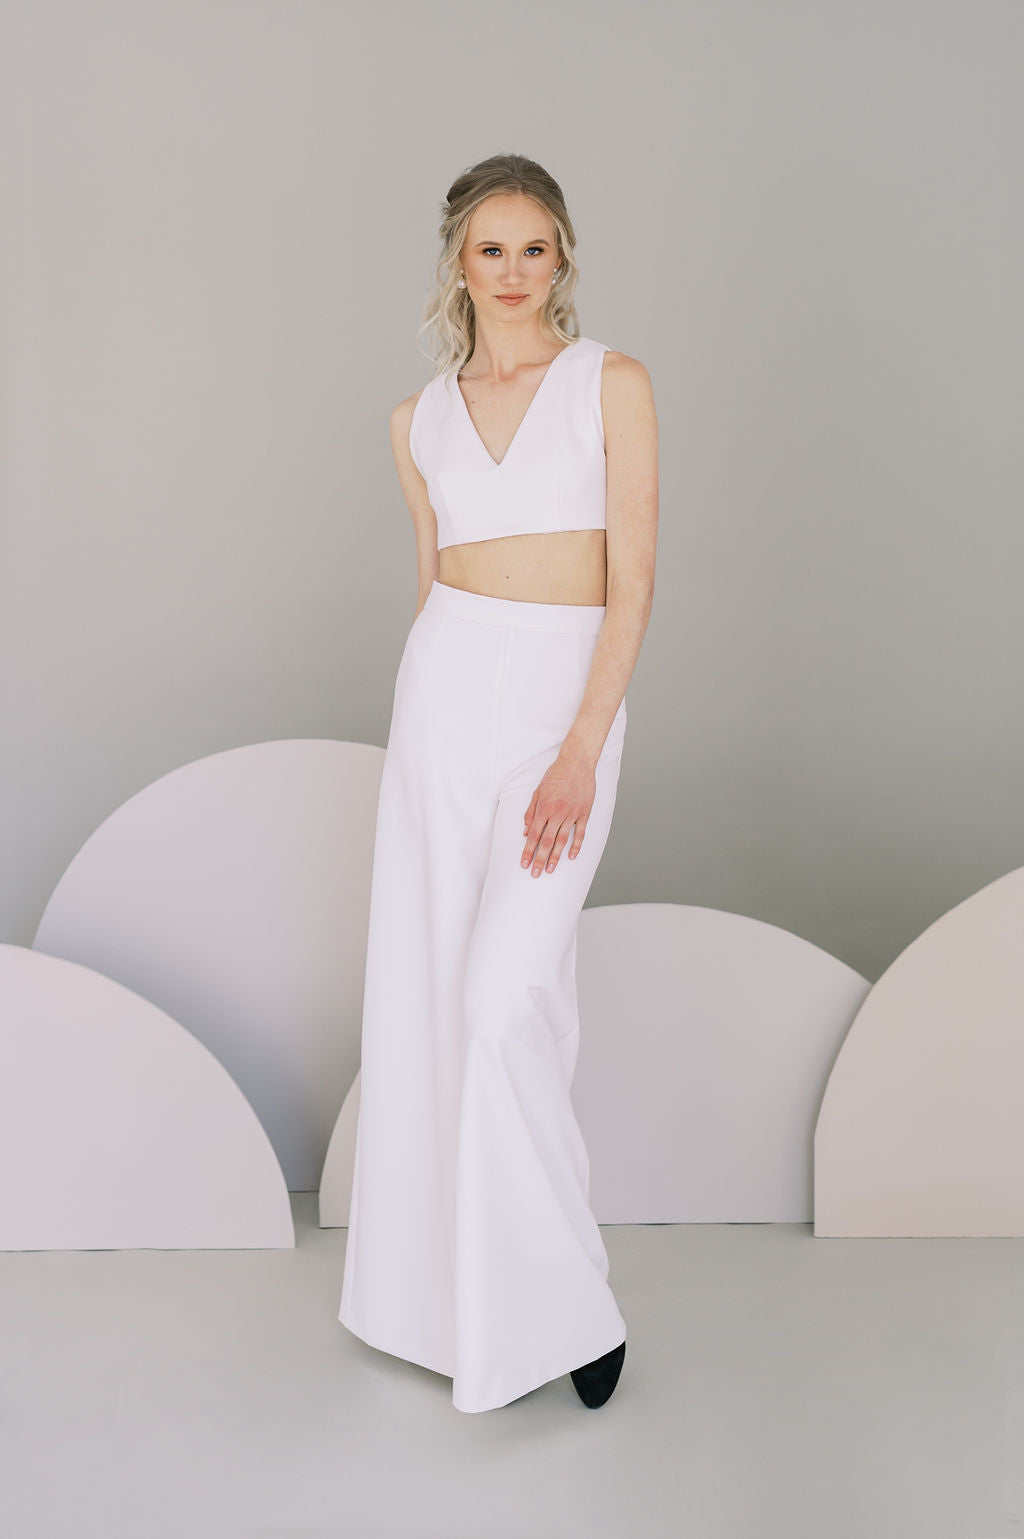 Wedding crop top in stretch crepe. Custom made by Catherine Langlois, Canada.